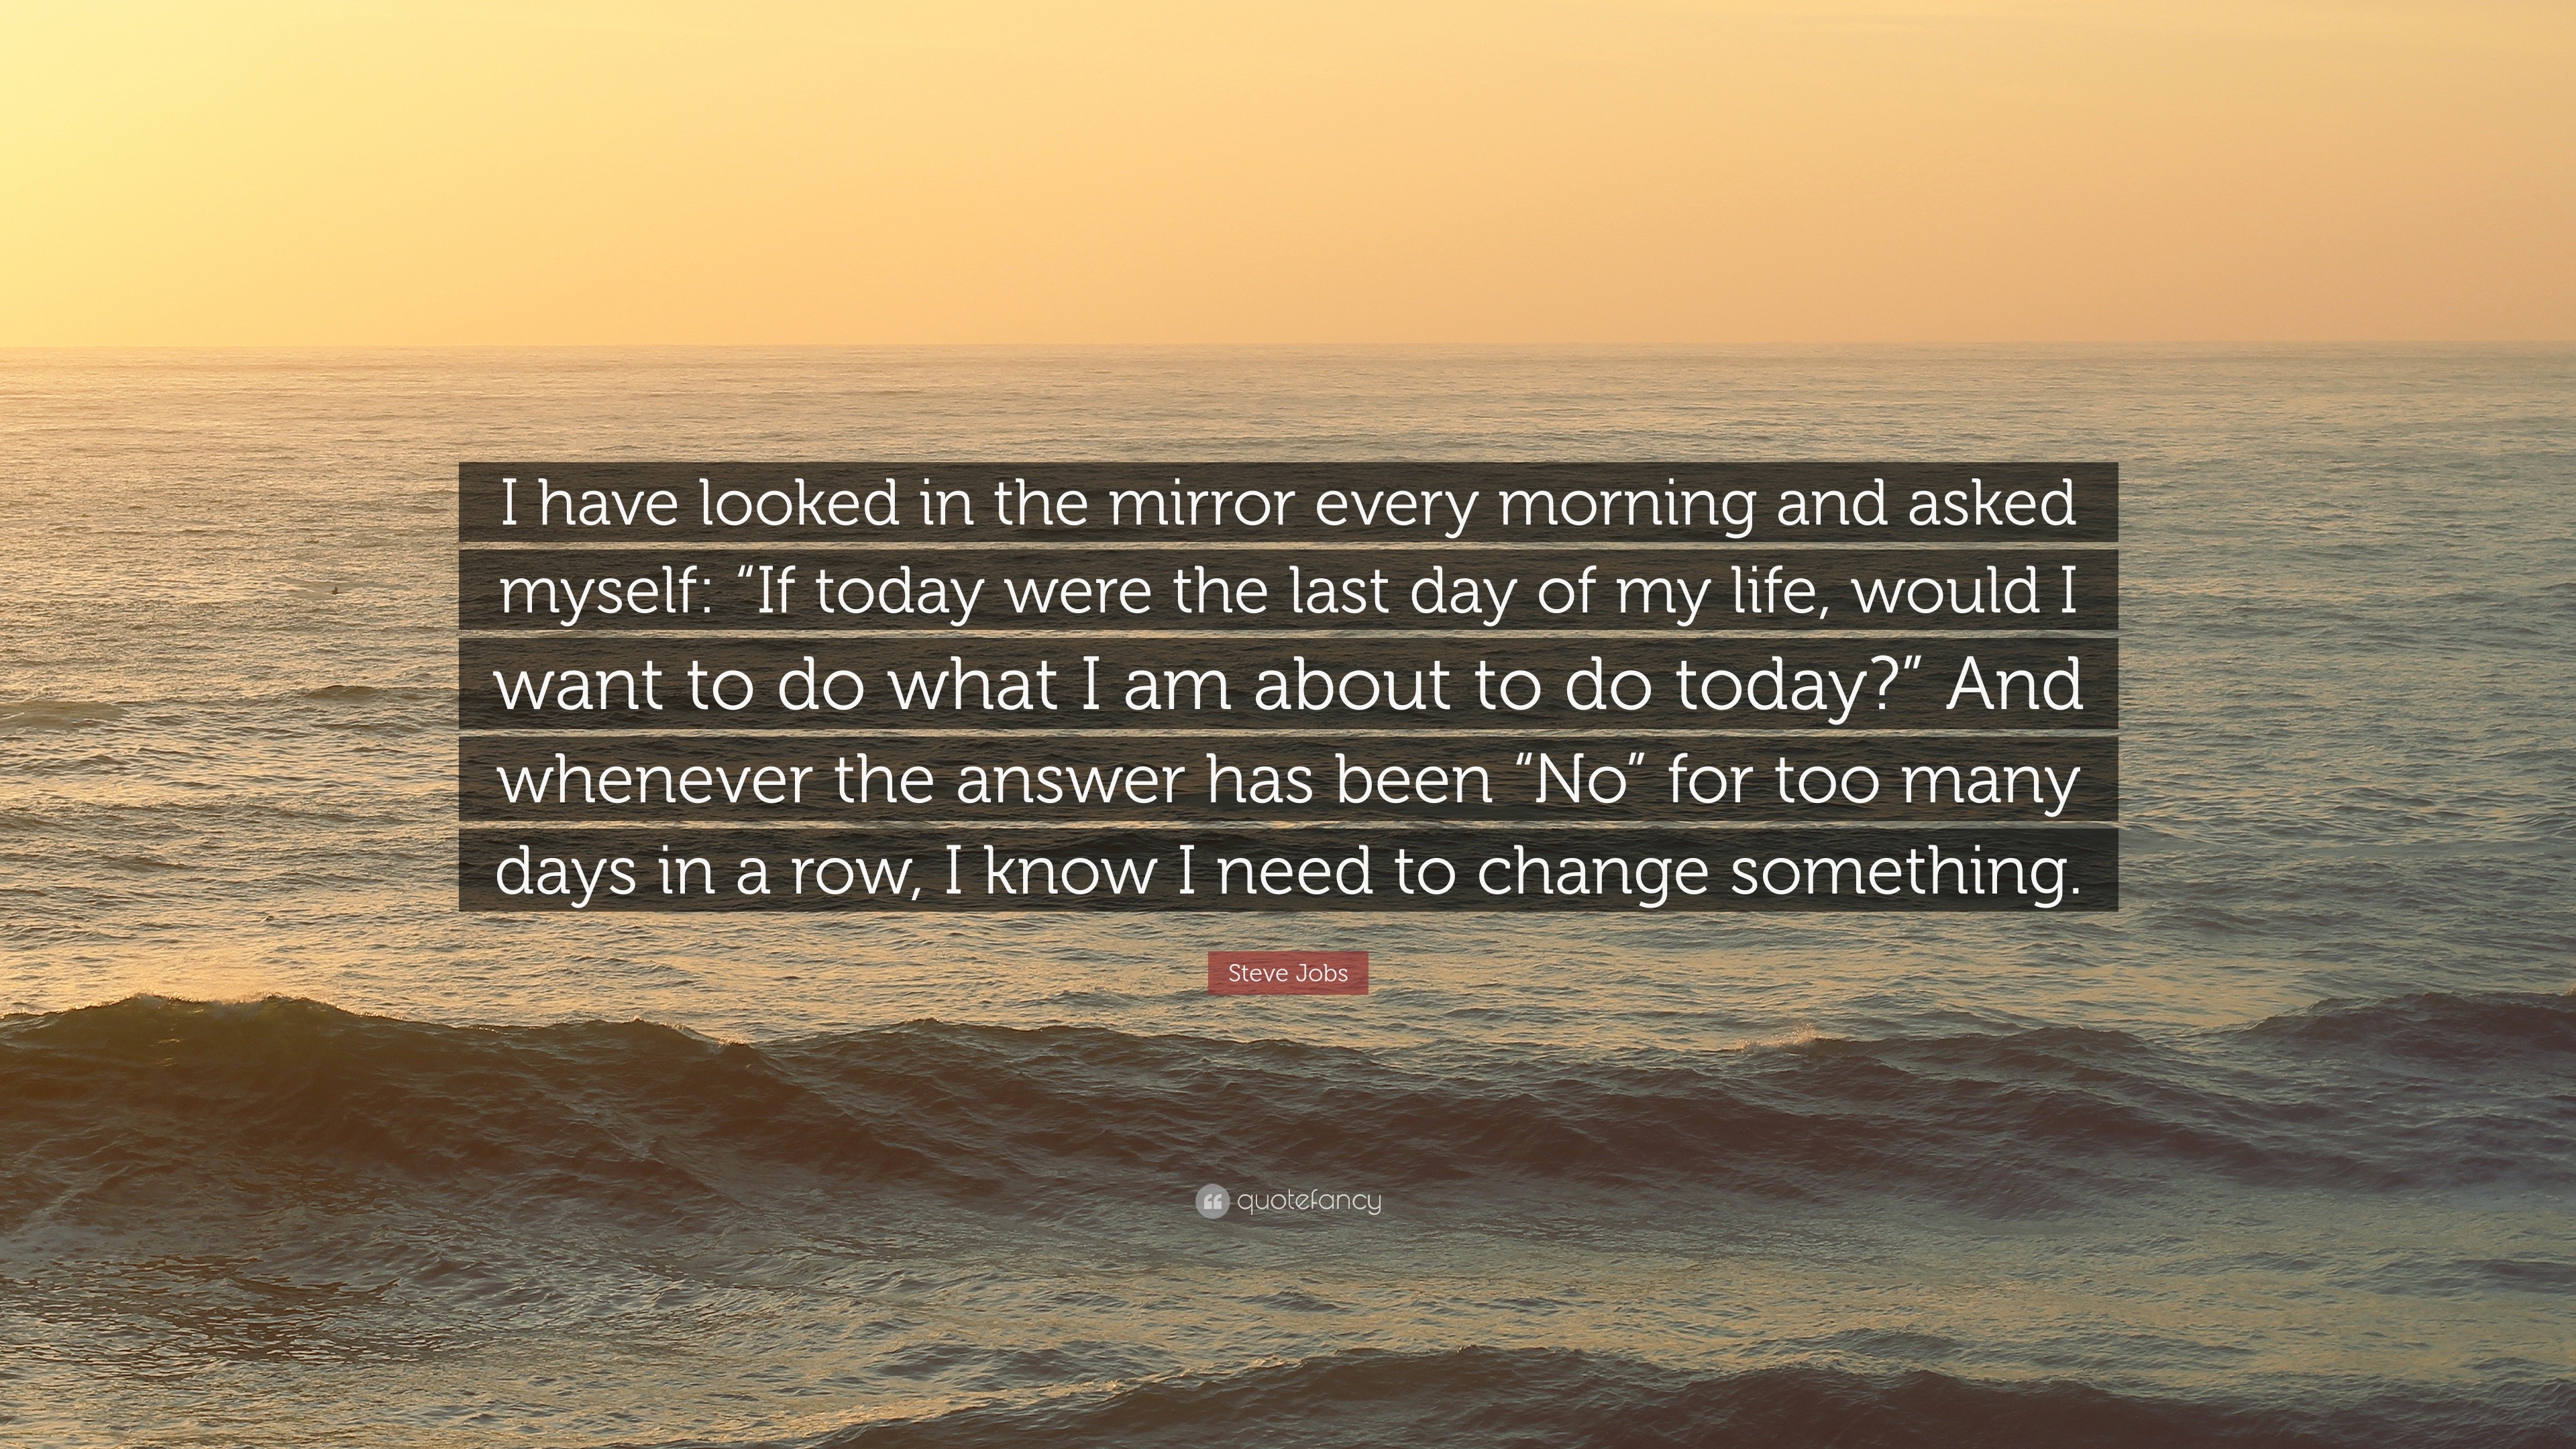 Steve Jobs Quote “I have looked in the mirror every morning and asked myself